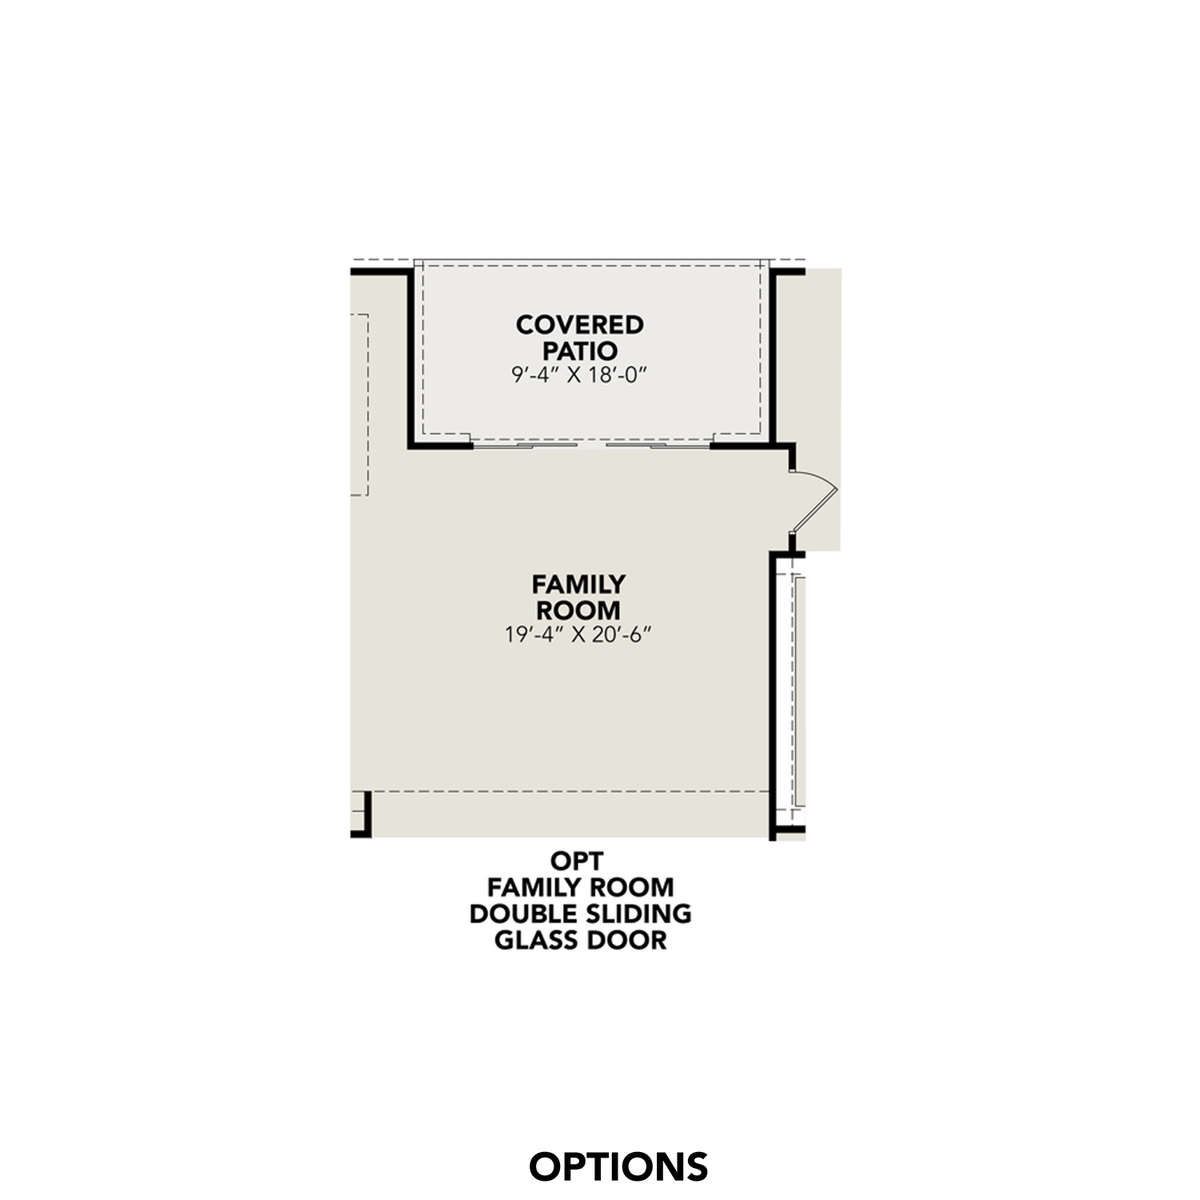 5 - The Jennings G buildable floor plan layout in Davidson Homes' The Reserve at Potranco Oaks community.